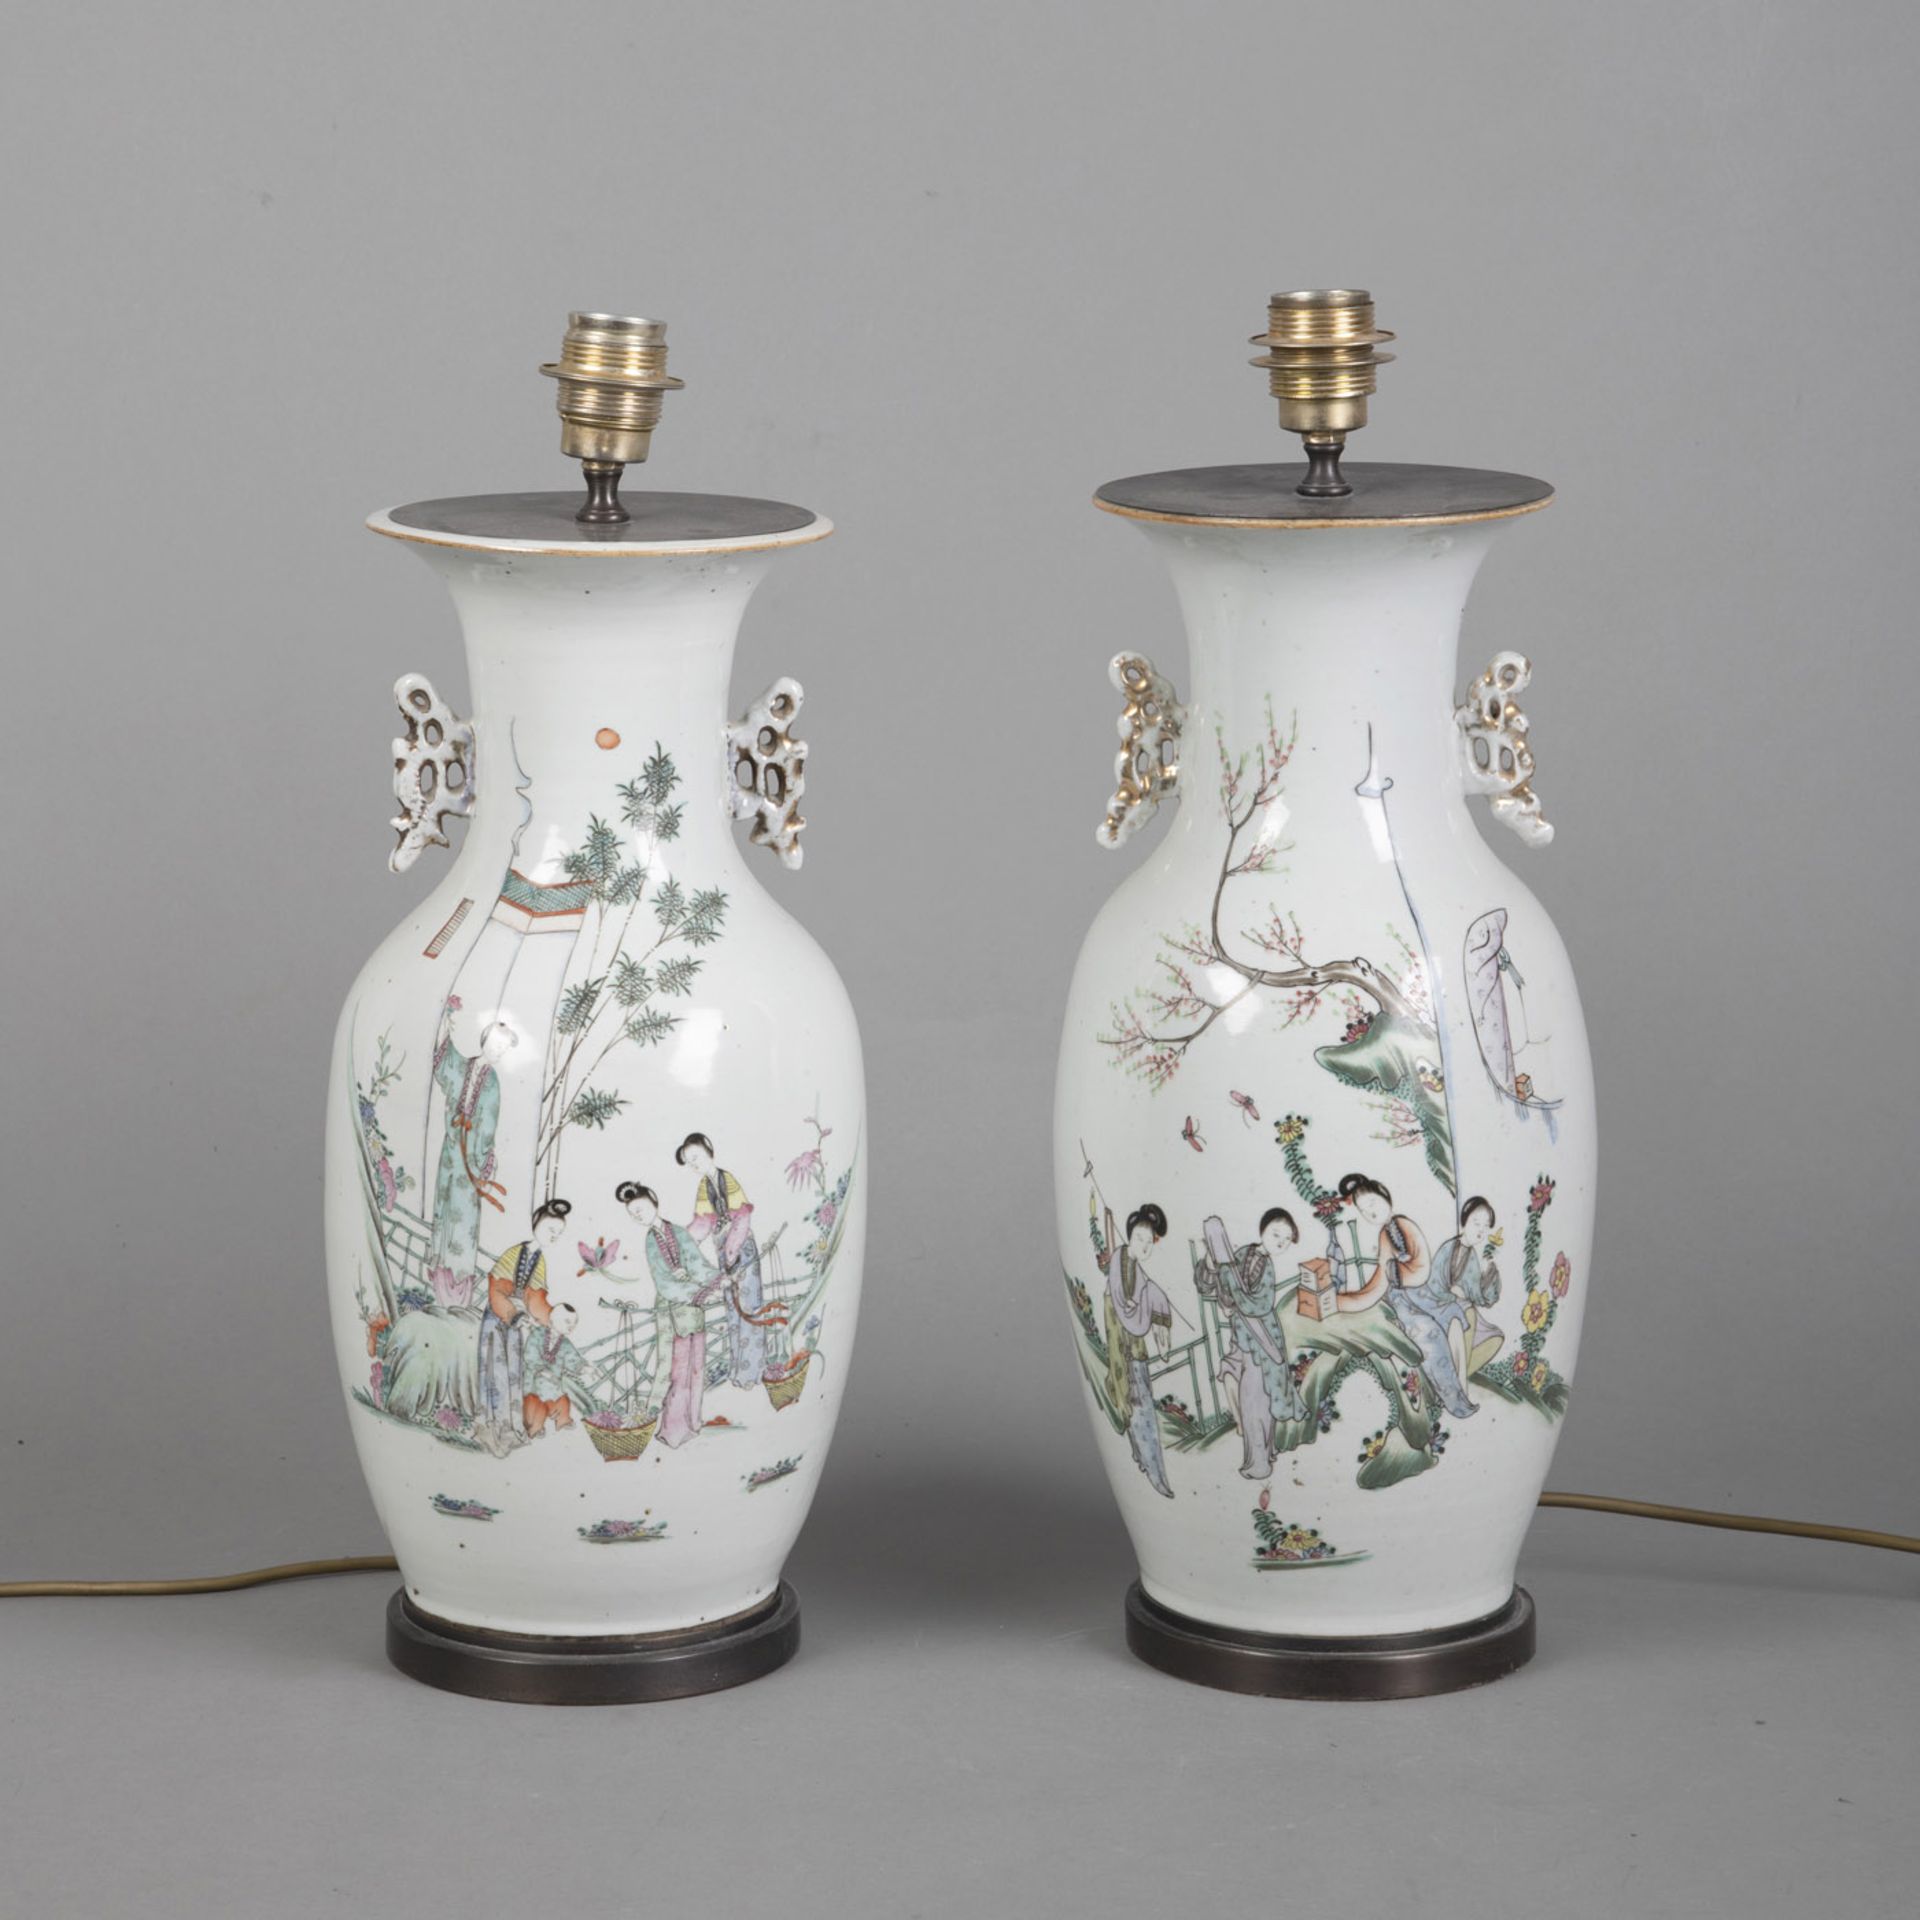 A PAIR OF POLYCHROME PAINTED PORCELAIN VASES DEPICTING LADIES IN A GARDEN, MOUNTED AS LAMPS